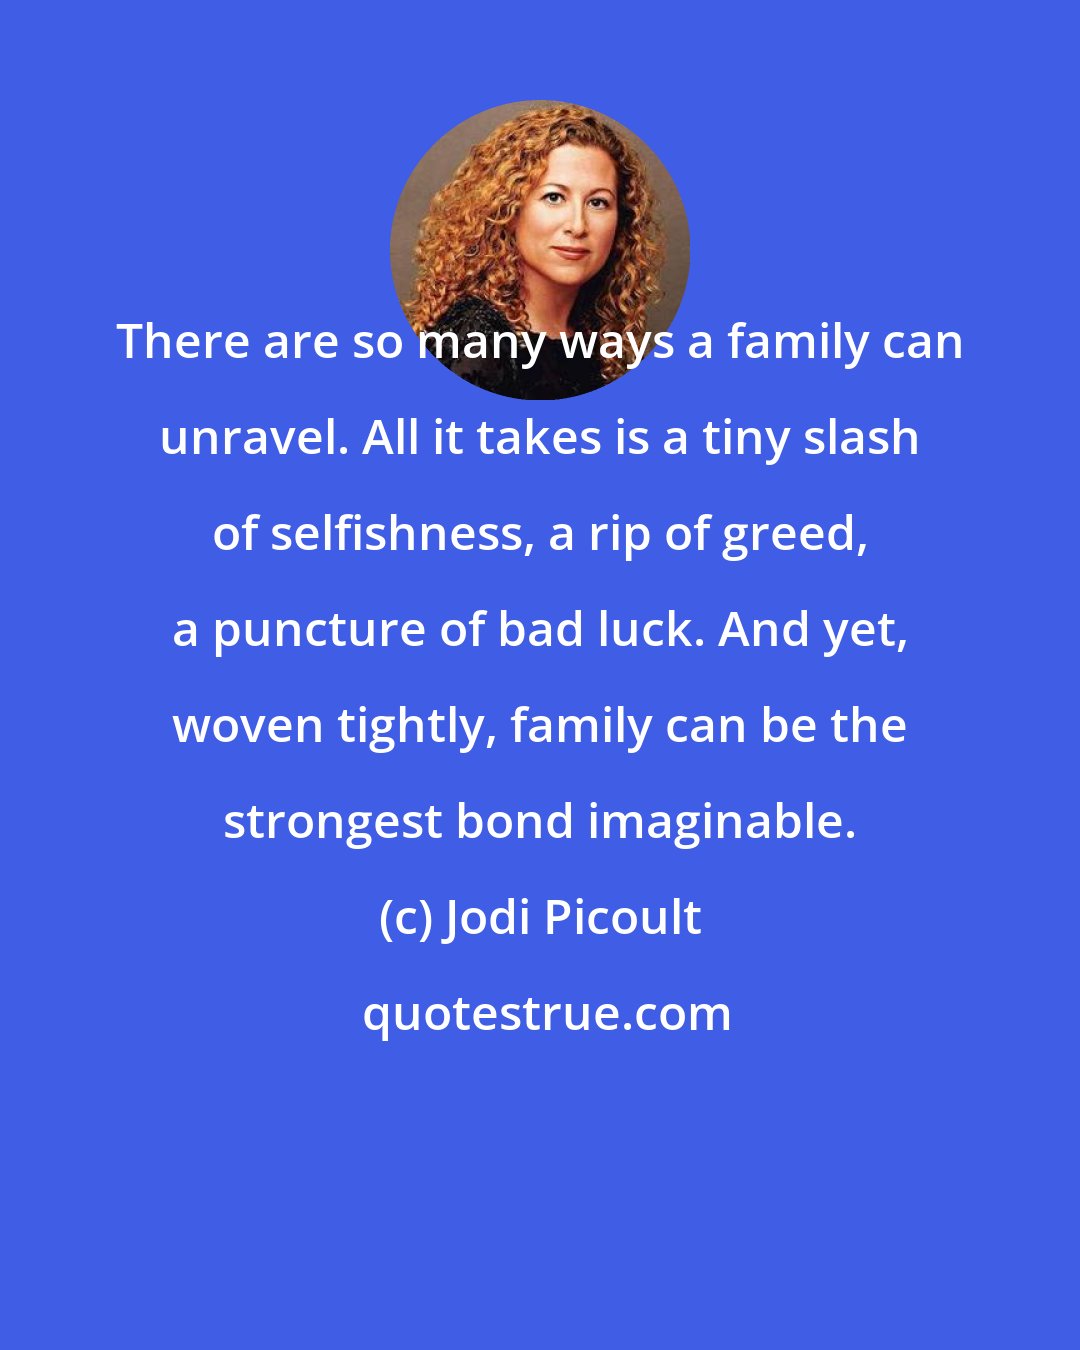 Jodi Picoult: There are so many ways a family can unravel. All it takes is a tiny slash of selfishness, a rip of greed, a puncture of bad luck. And yet, woven tightly, family can be the strongest bond imaginable.